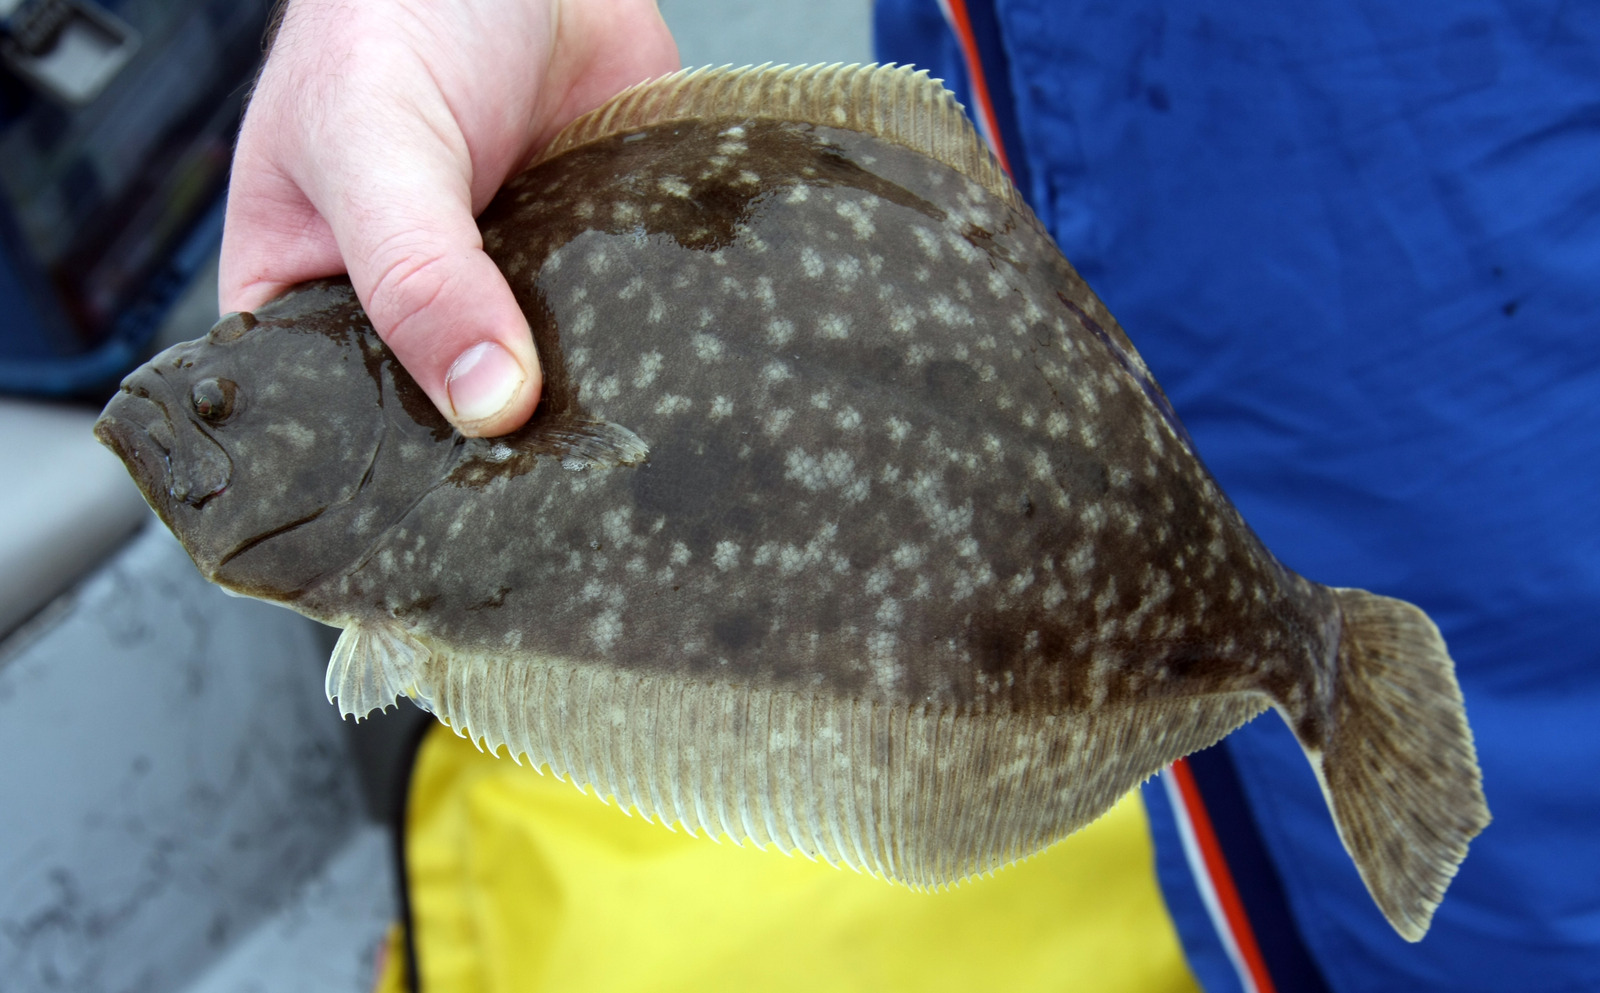 a fisherman holding a flounder Please take a look at my other fishing photos: